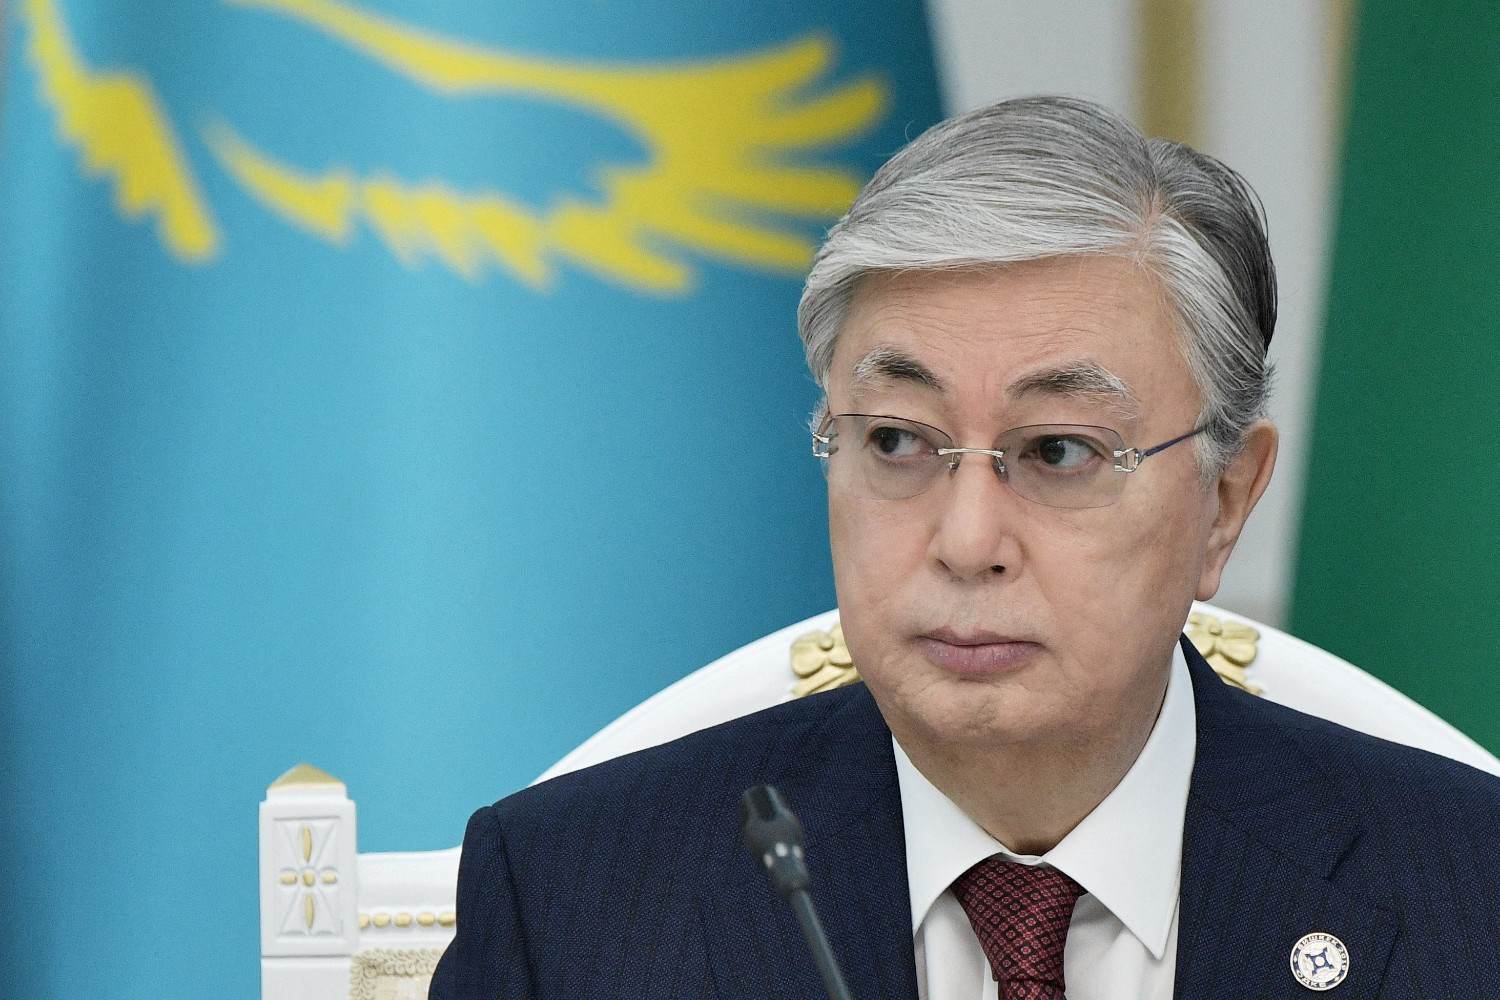 Kazakh President Kassym-Jomart Tokayev attends a session of the Council of the Collective Security Treaty Organization (CSTO) in Bishkek, Kyrgyzstan November 28, 2019. Sputnik/Alexei Nikolsky/Kremlin via Reuters ATTENTION EDITORS - THIS IMAGE WAS PROVIDED BY A THIRD PARTY./File Photo